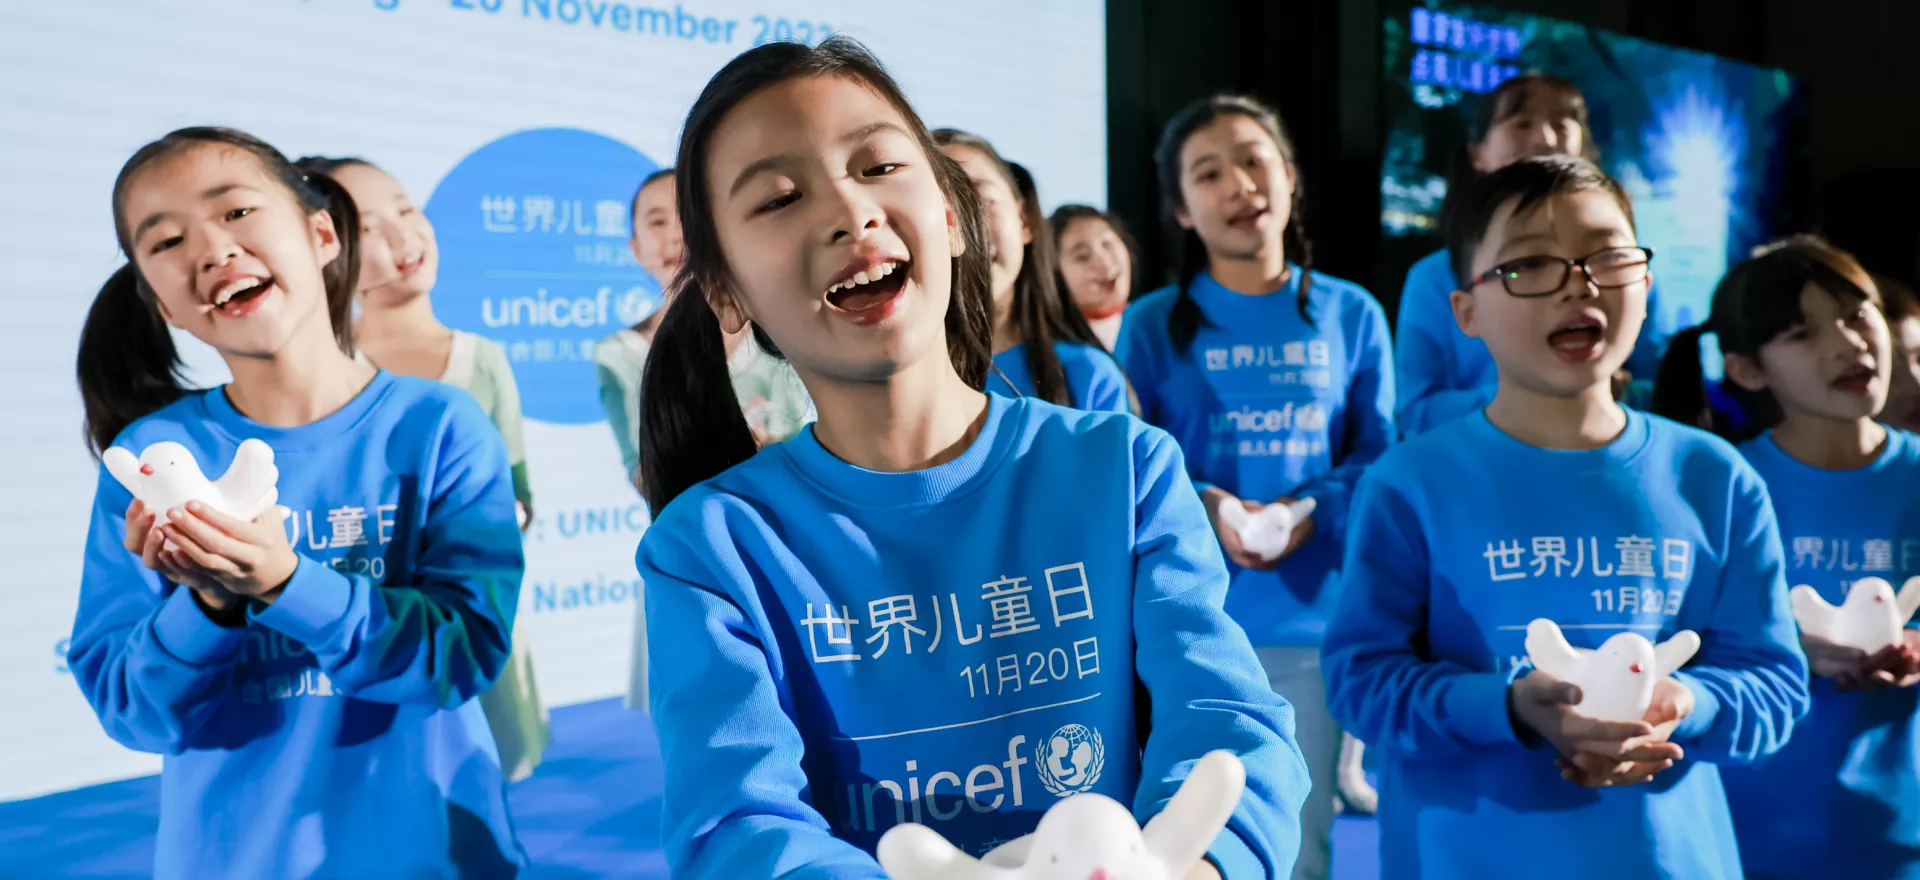 Children from the China National Children's Center perform the World Children's Day theme song ‘In the Future’ created by UNICEF Ambassador Wang Yuan during the World Children's Day event hosted by UNICEF China in Beijing on 20 November 2023.